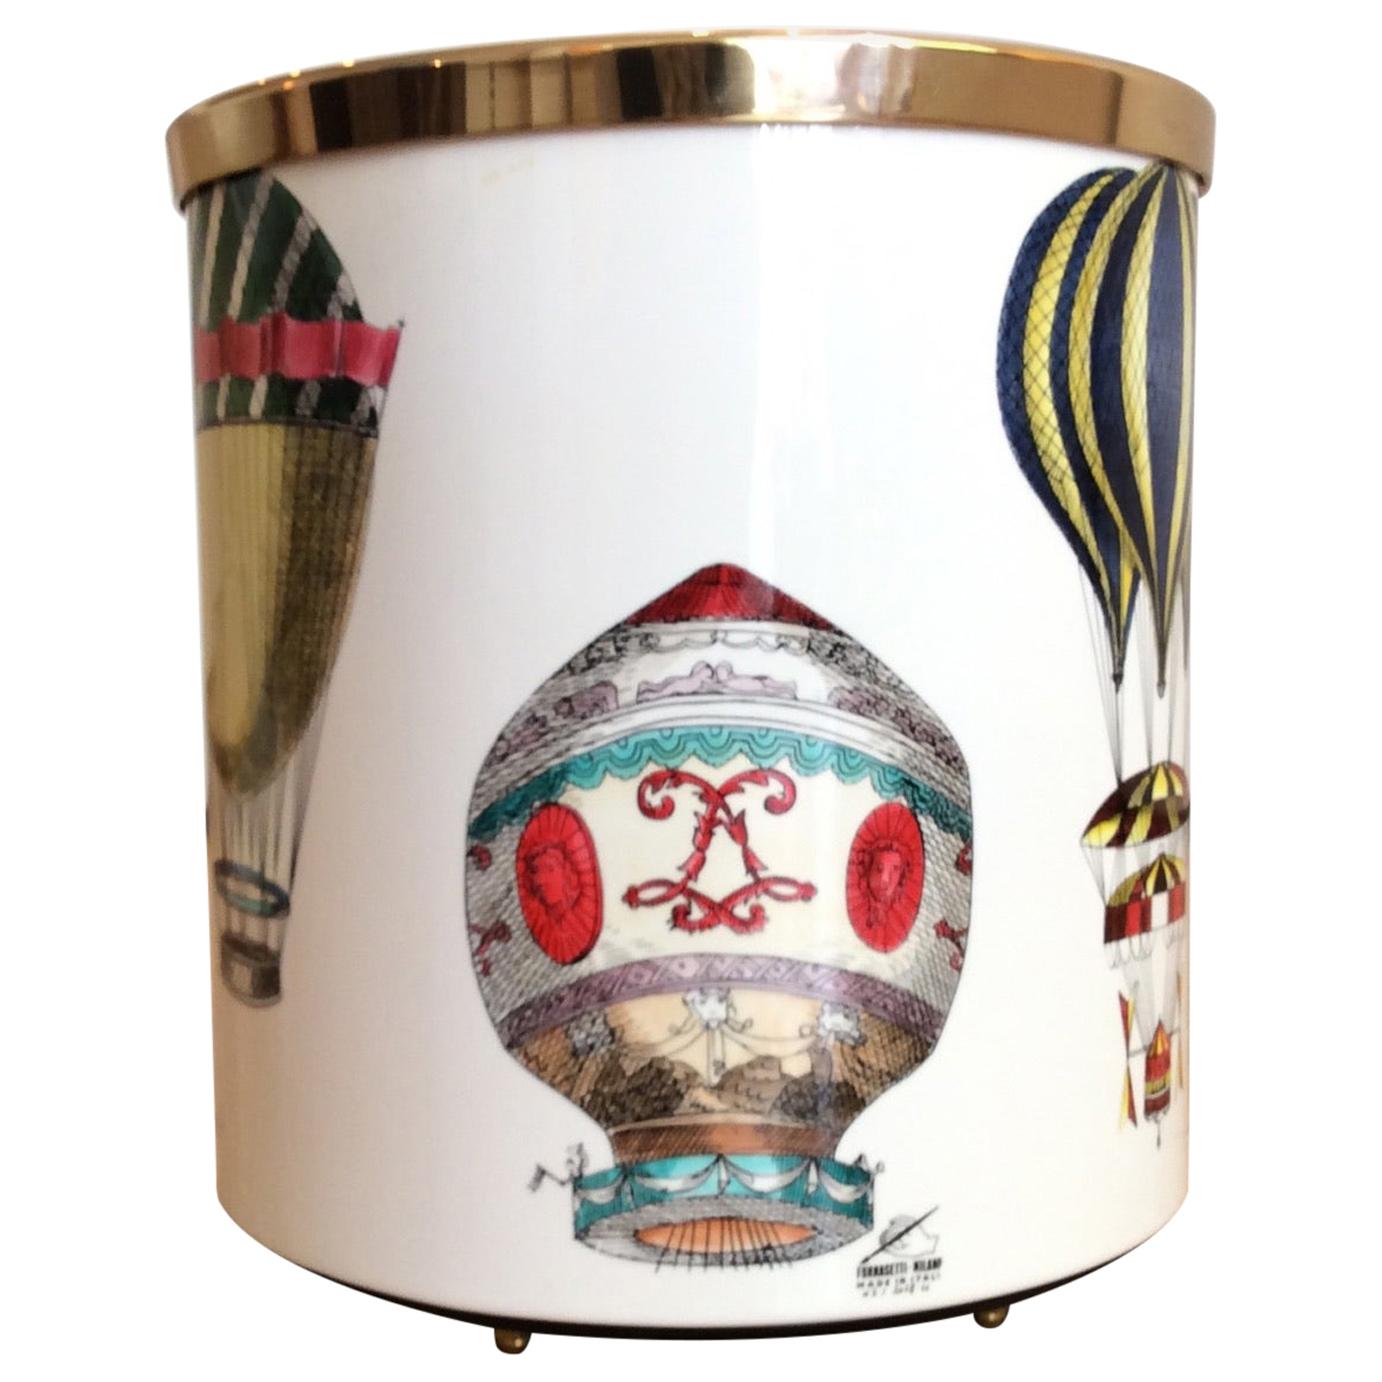 'Palloni' 'Hot Air Balloons' Waste Paper Basket by Fornasetti, Contemporary